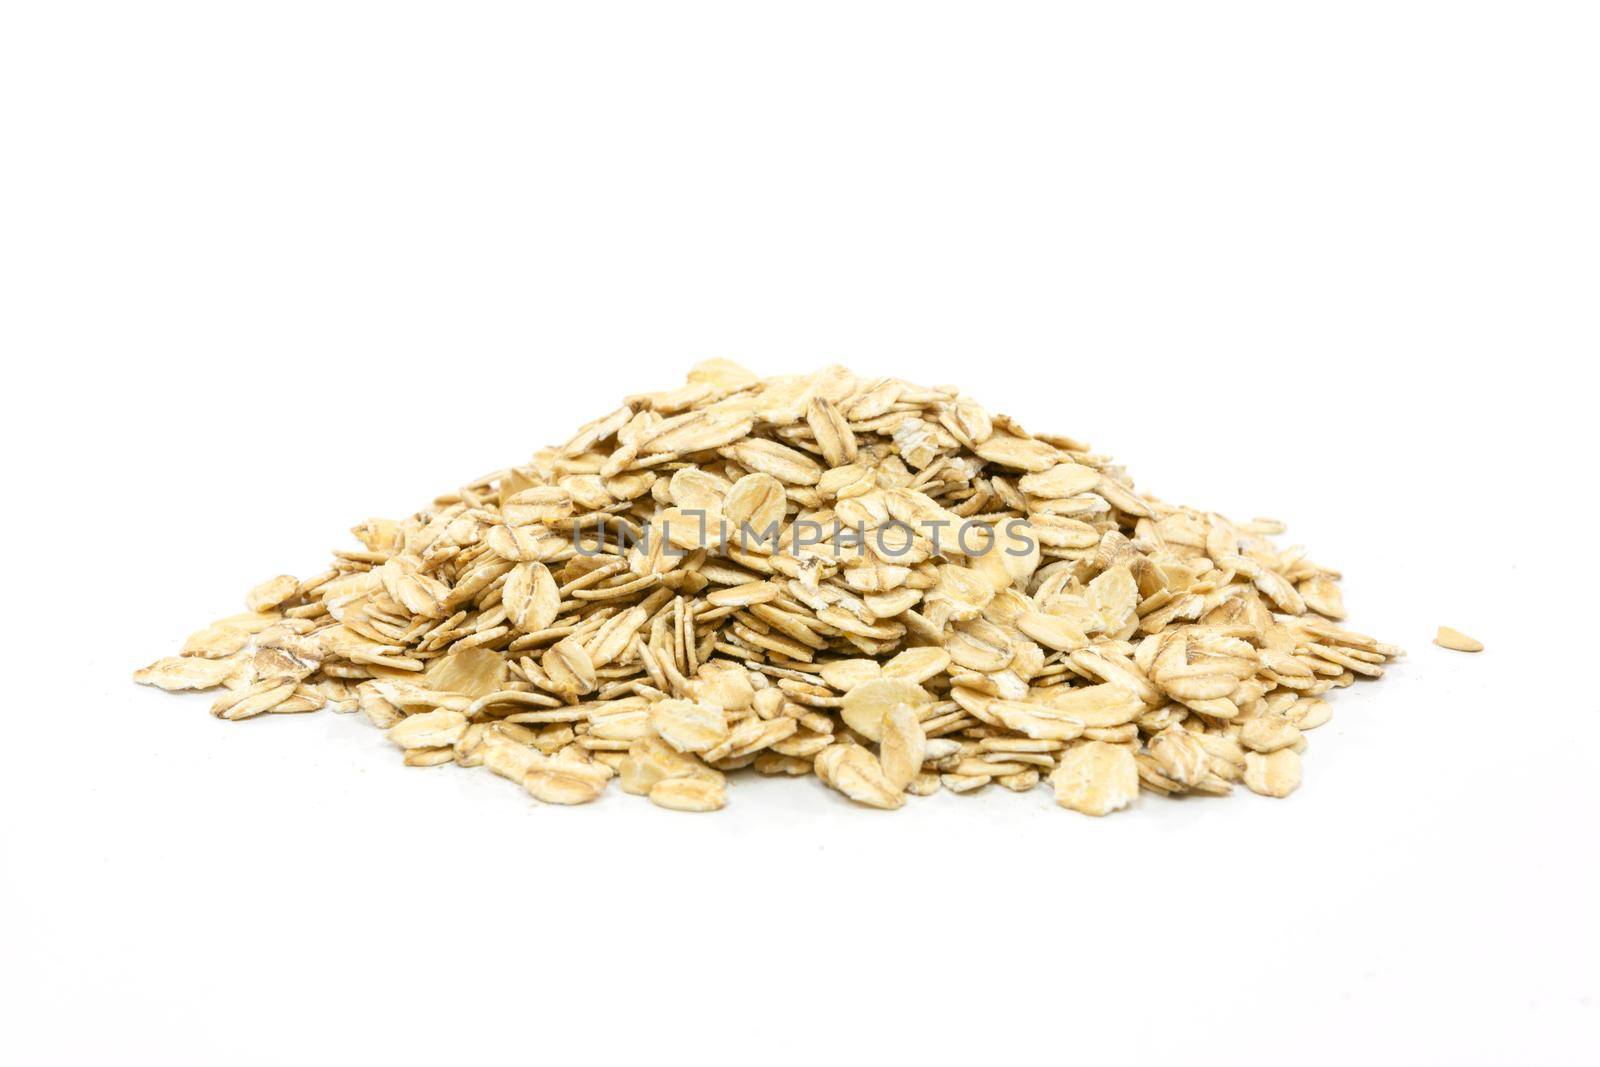 Dry rolled oats by wdnet_studio